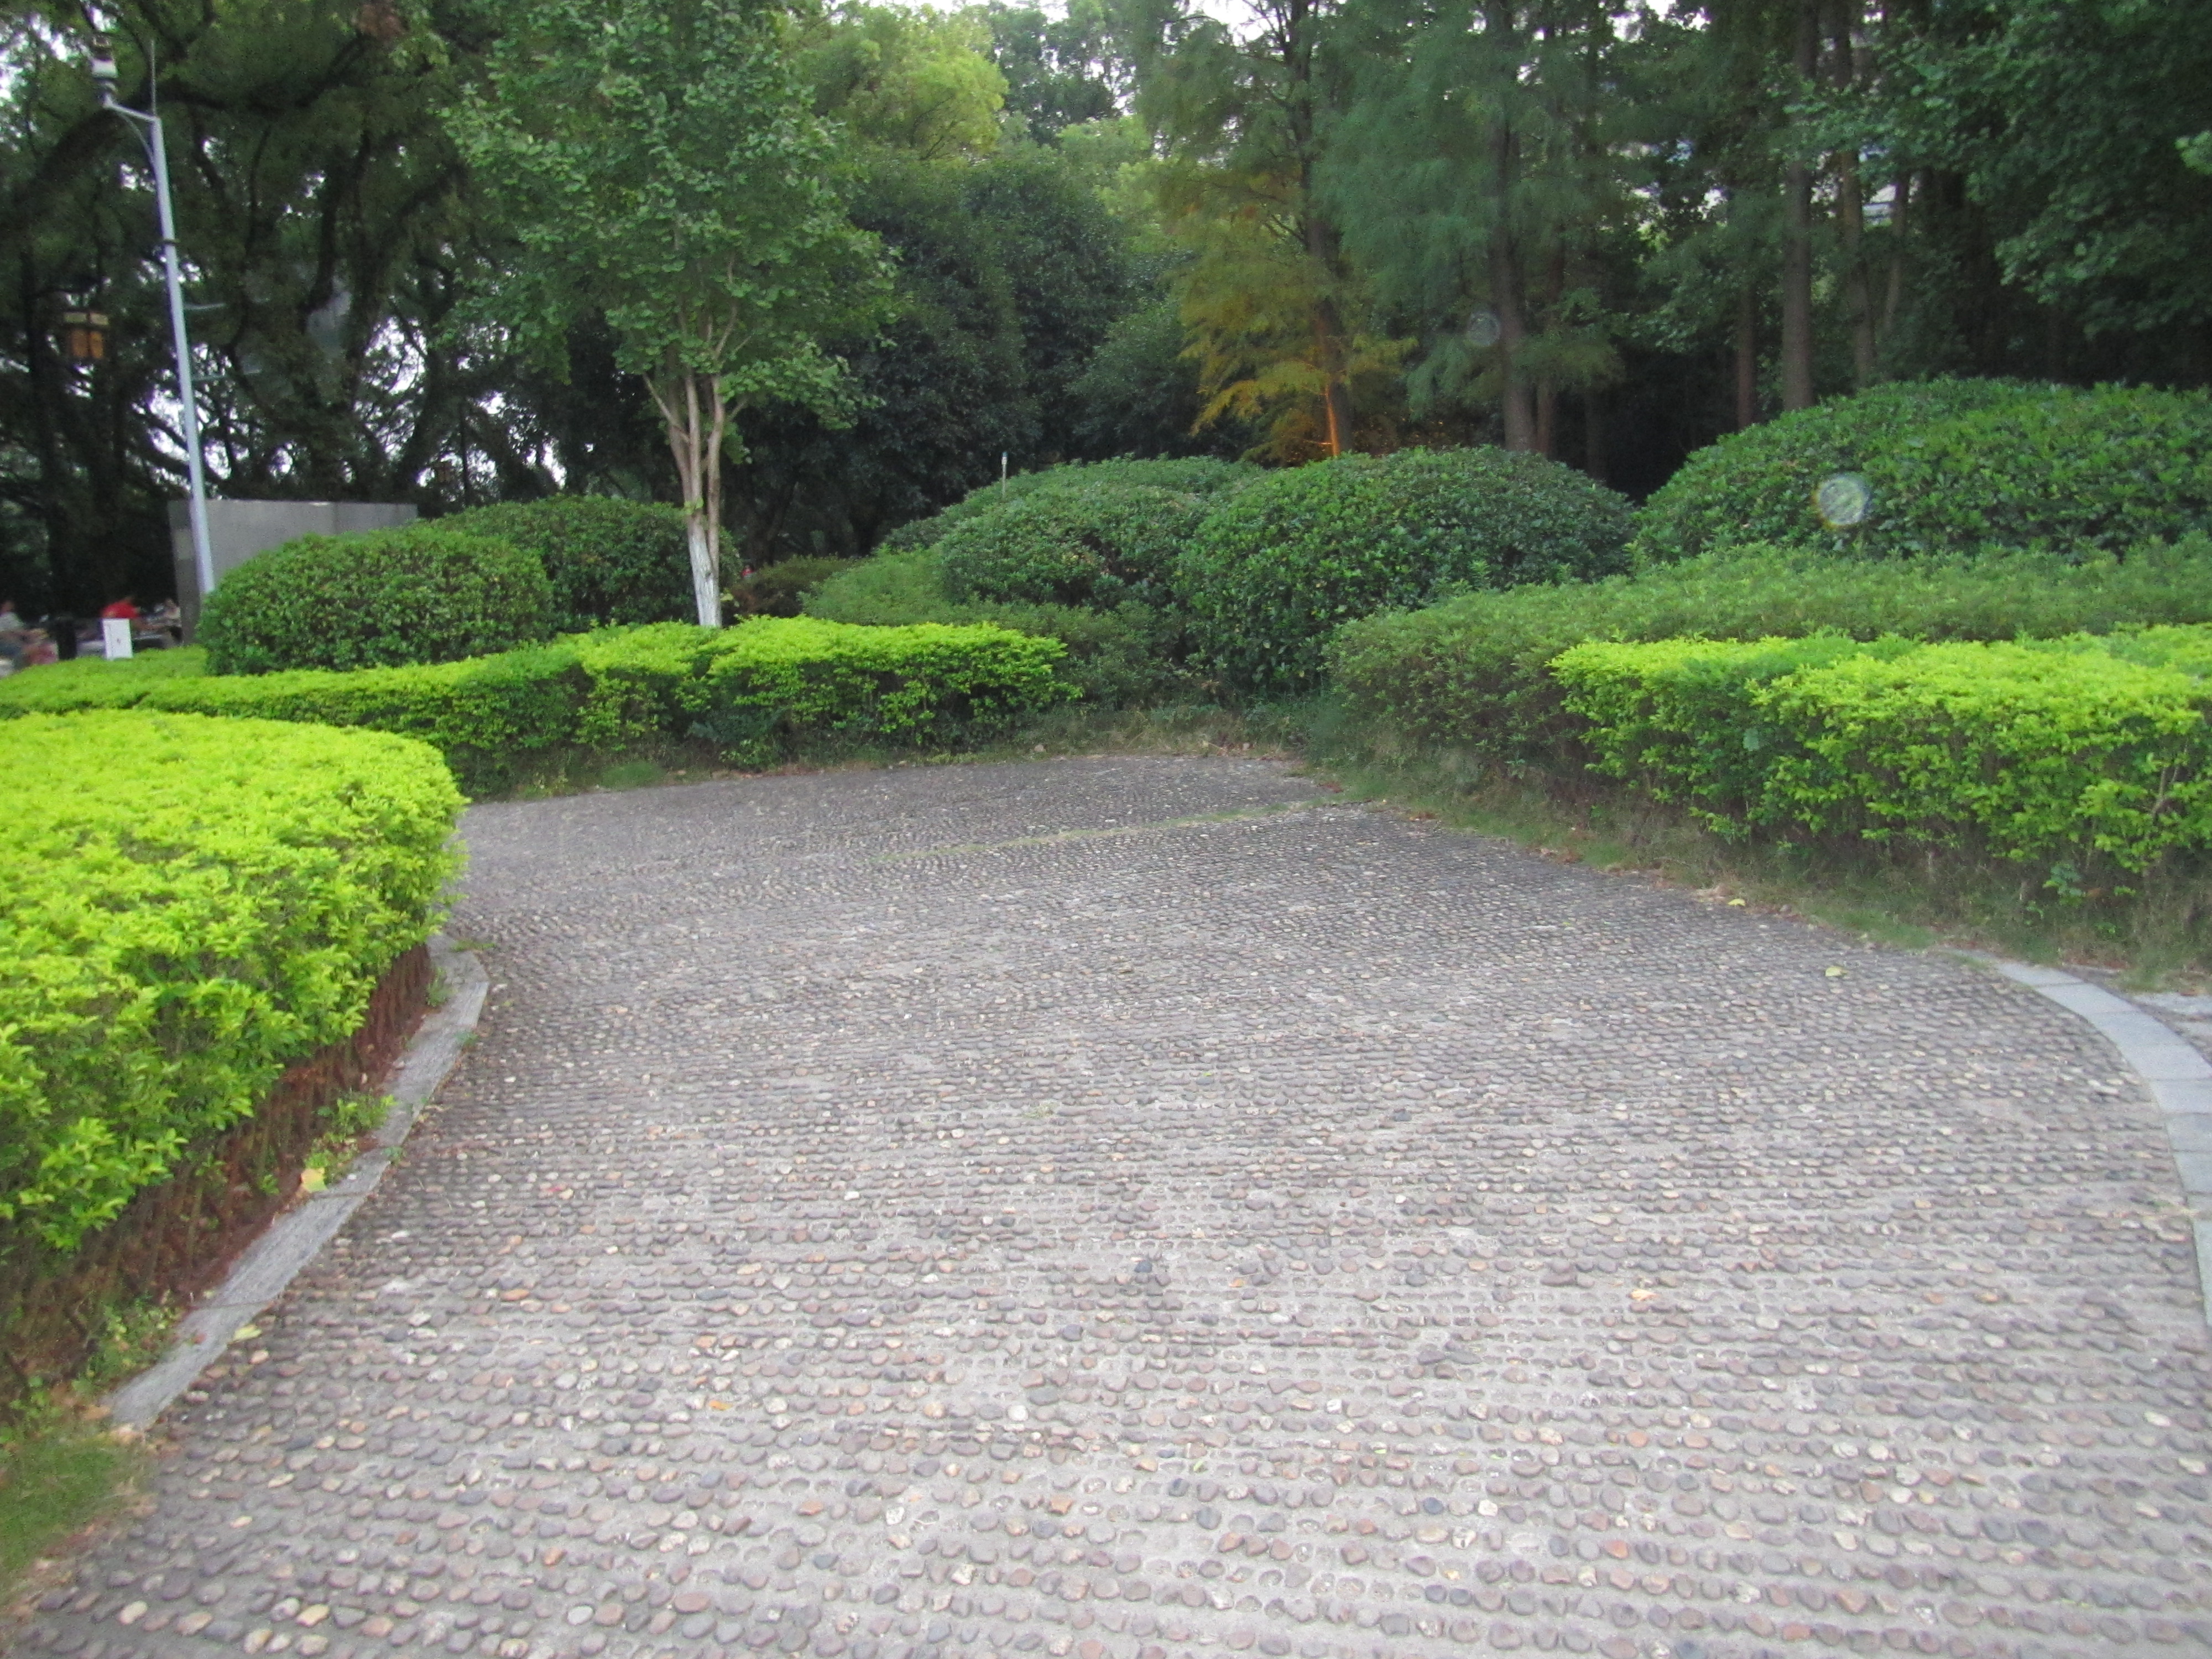 Beautiful paths leading to the river.  The gardens are well kept here.  